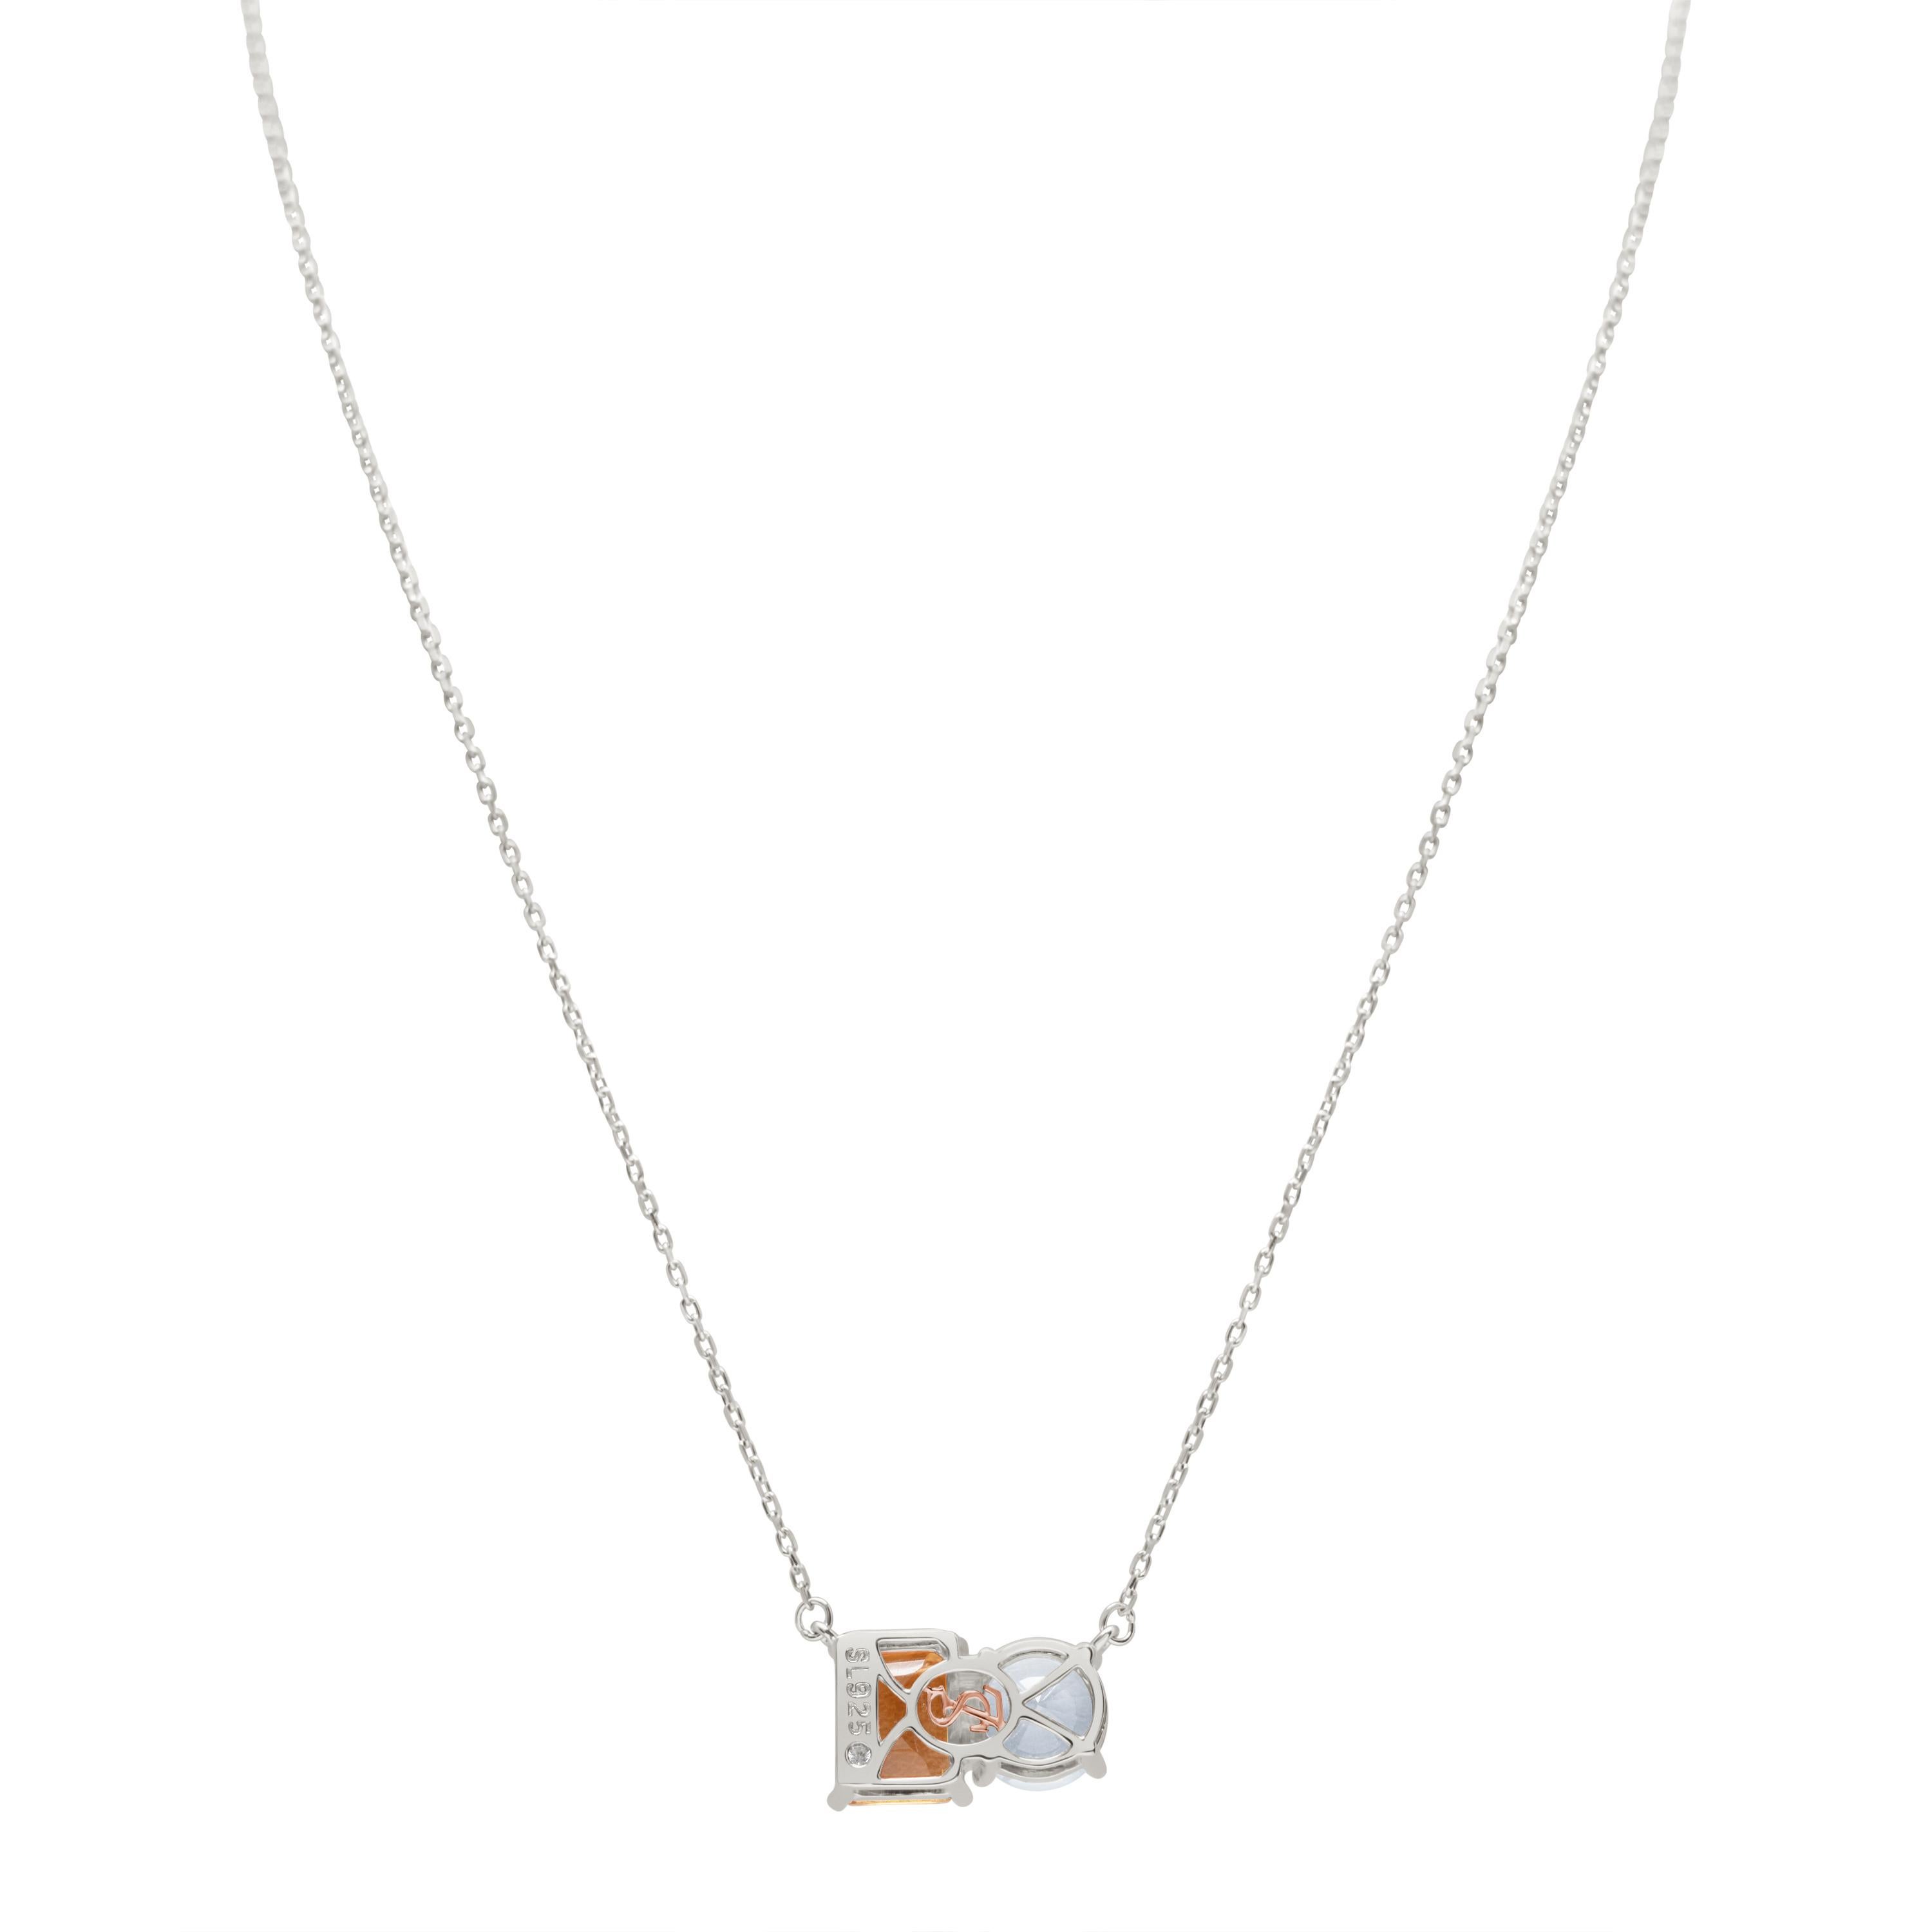 Shimmering in hues of white and orange, this Suzy Levian necklace is as on trend as can be, and features a round cut white topaz and an emerald cut orange citrine as a perfectly matched pair. This necklace symbolizes a perfect pairing of unique